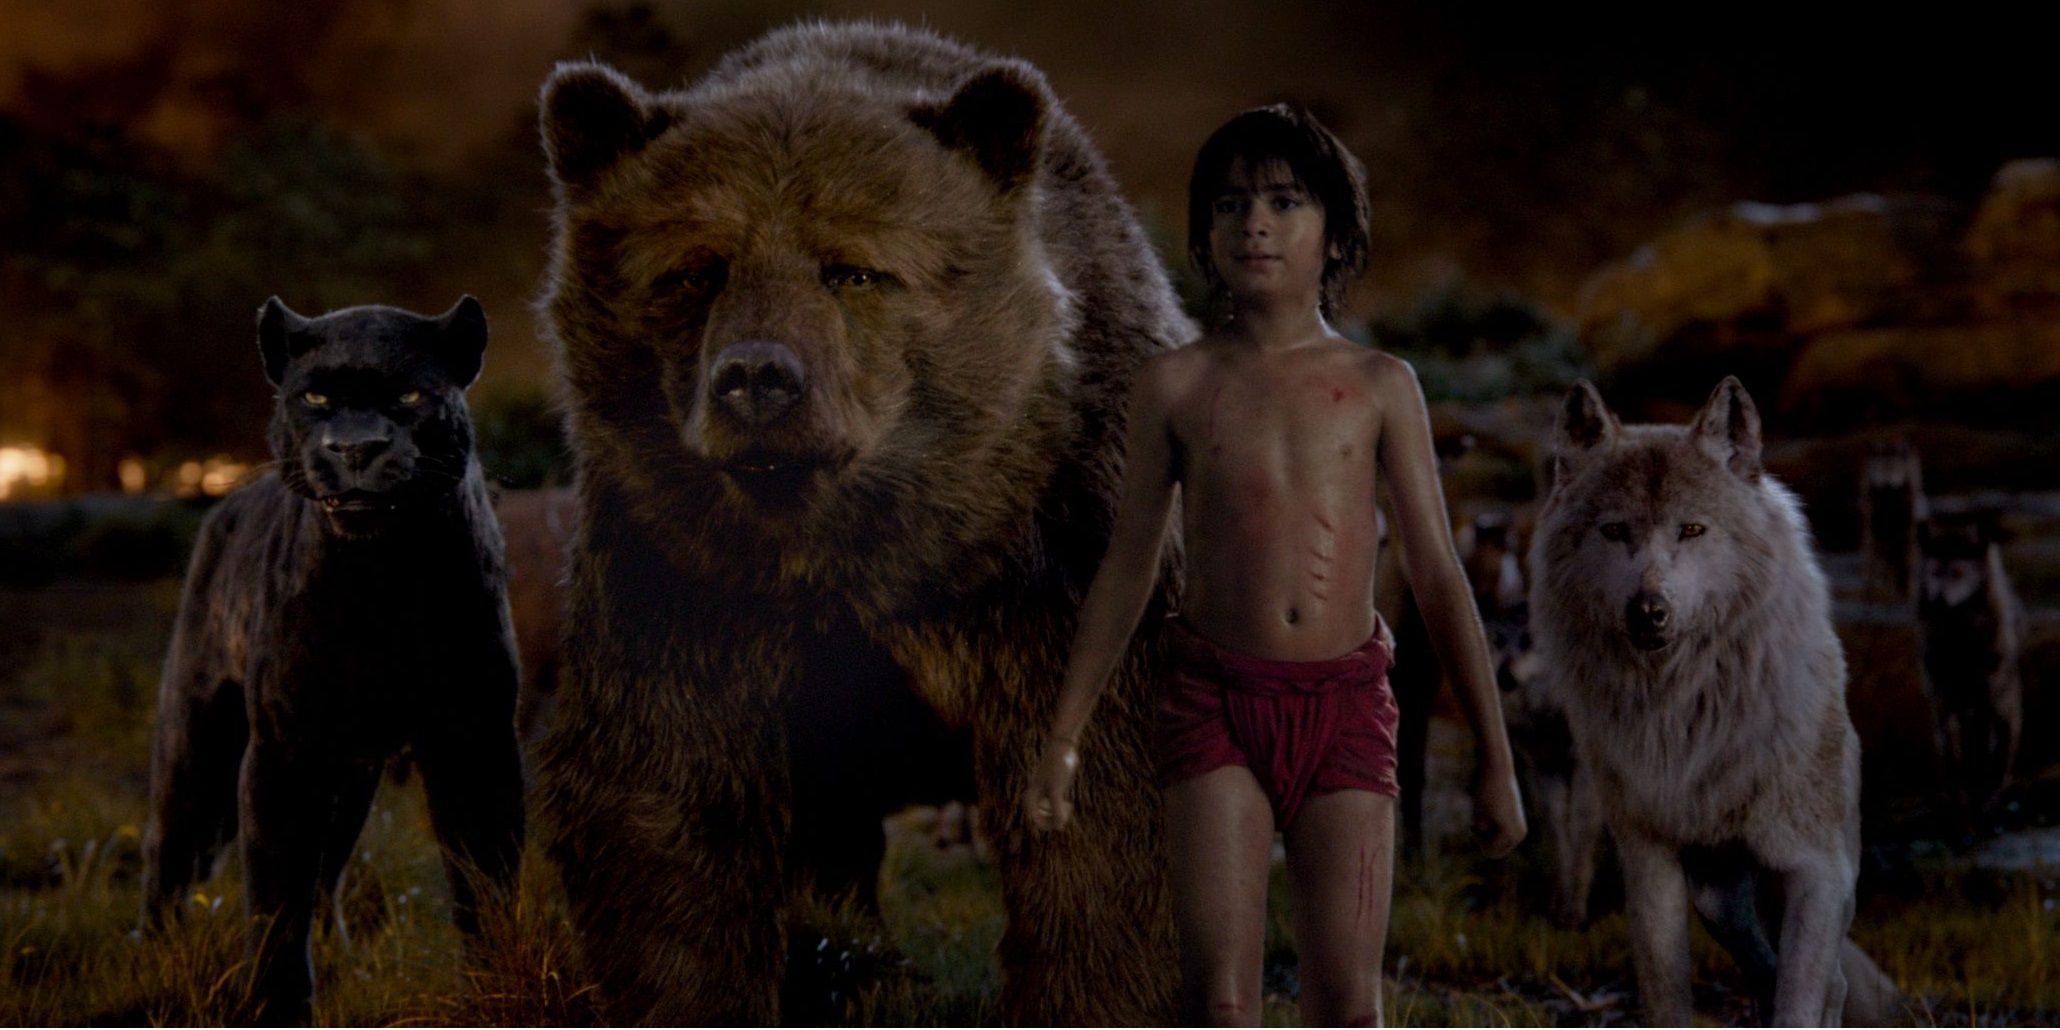 10 Reasons The Jungle Book Is Disneys Best LiveAction Remake